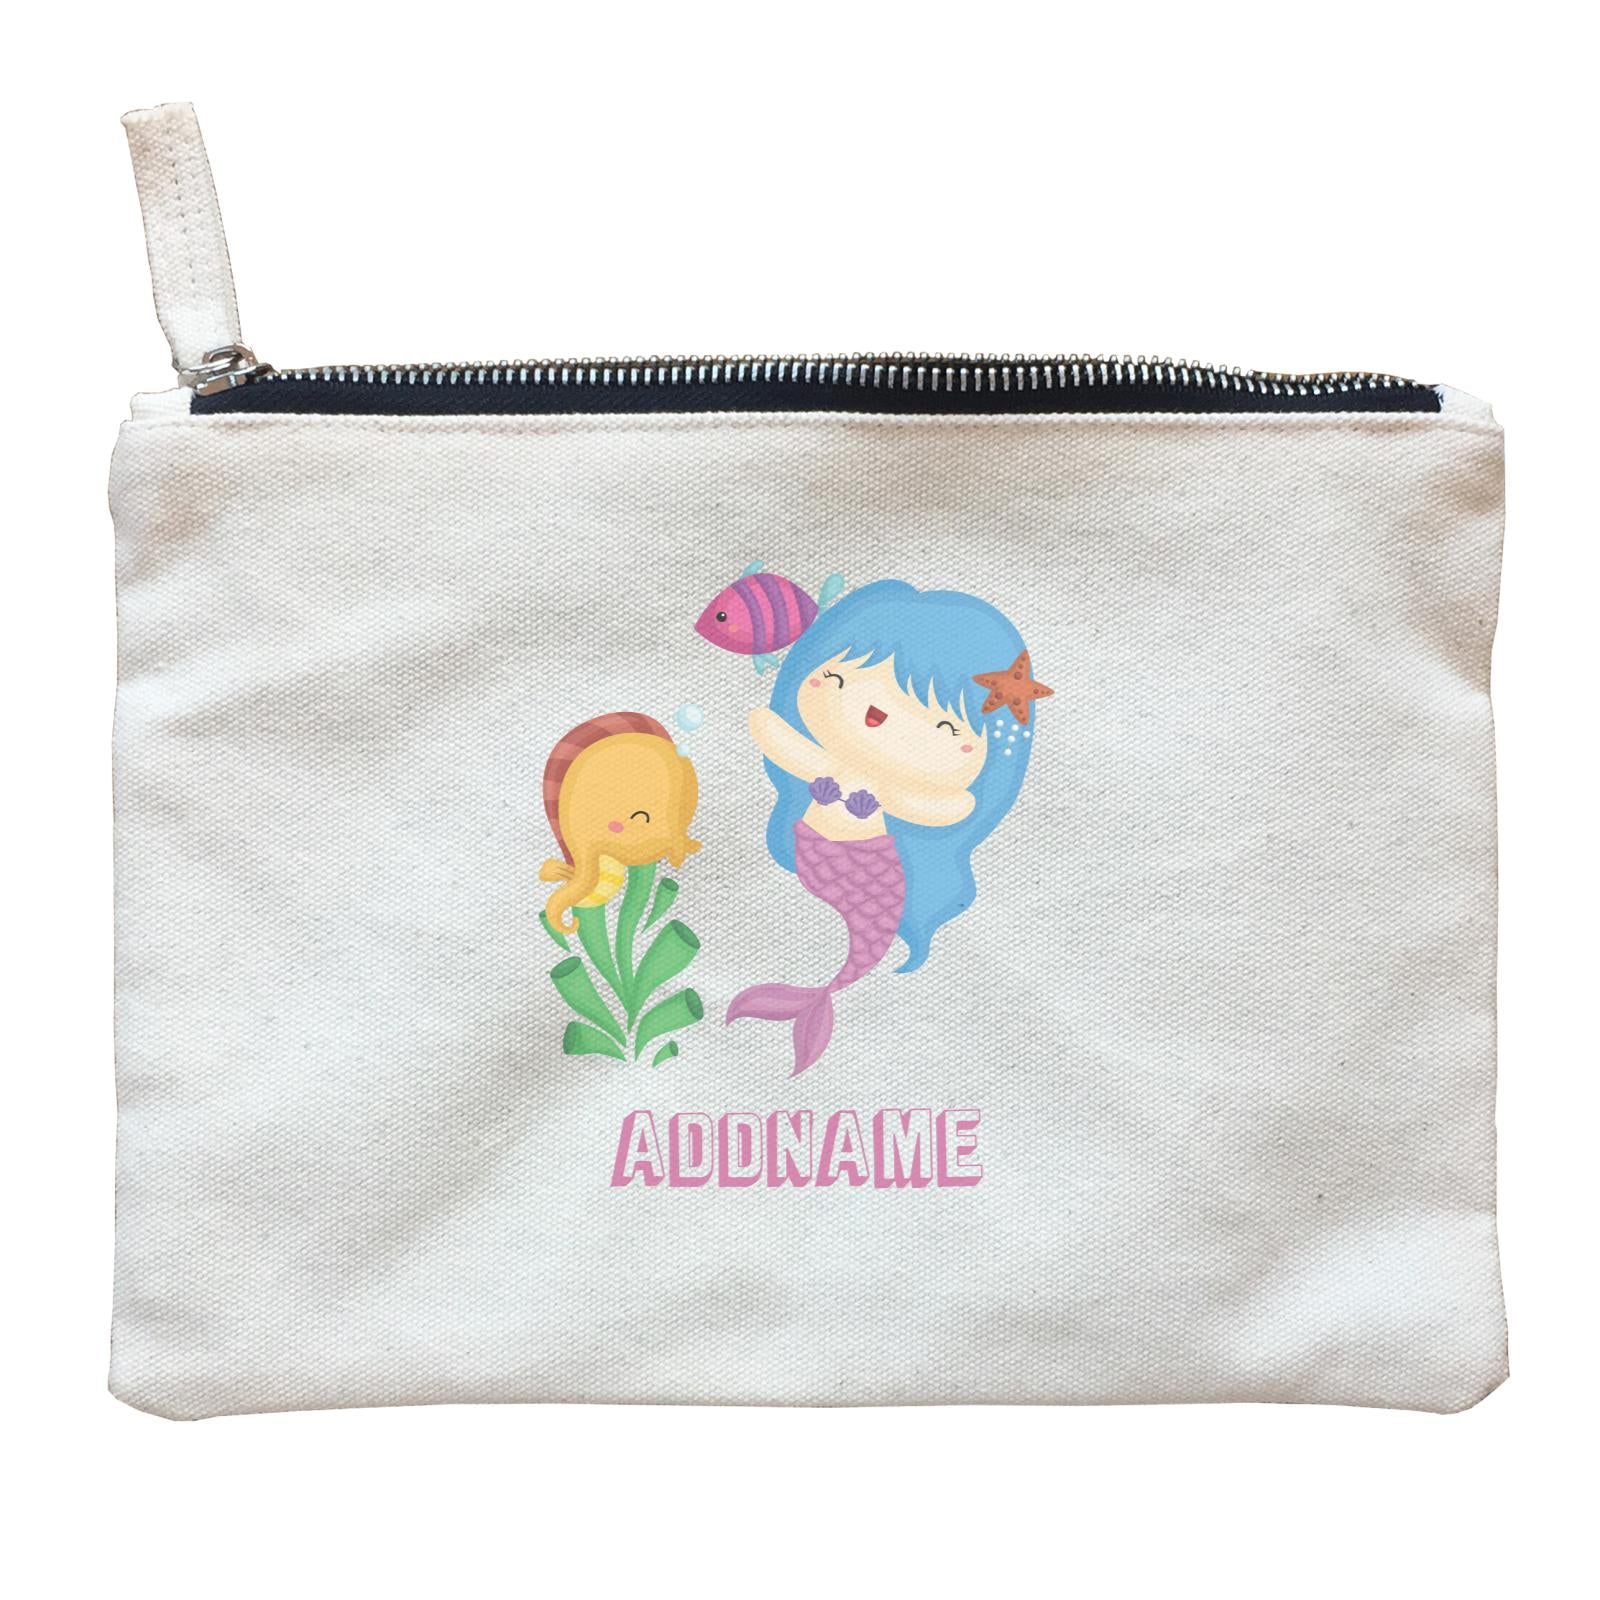 Birthday Mermaid Blue Hair Mermaid Playing With Seahorse Addname Zipper Pouch